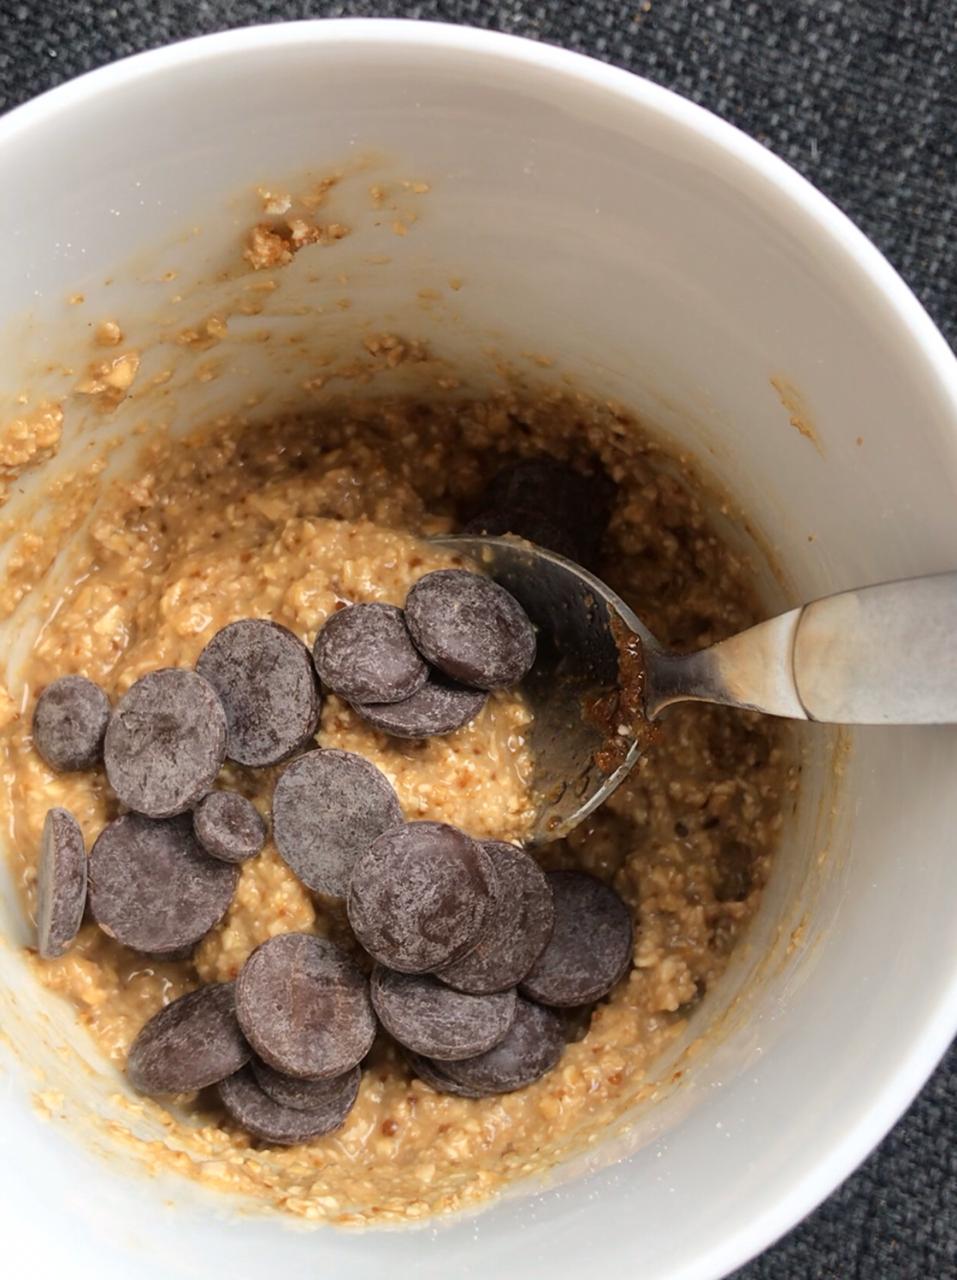 Mix all ingredients for oatmeal cookie in a bowl